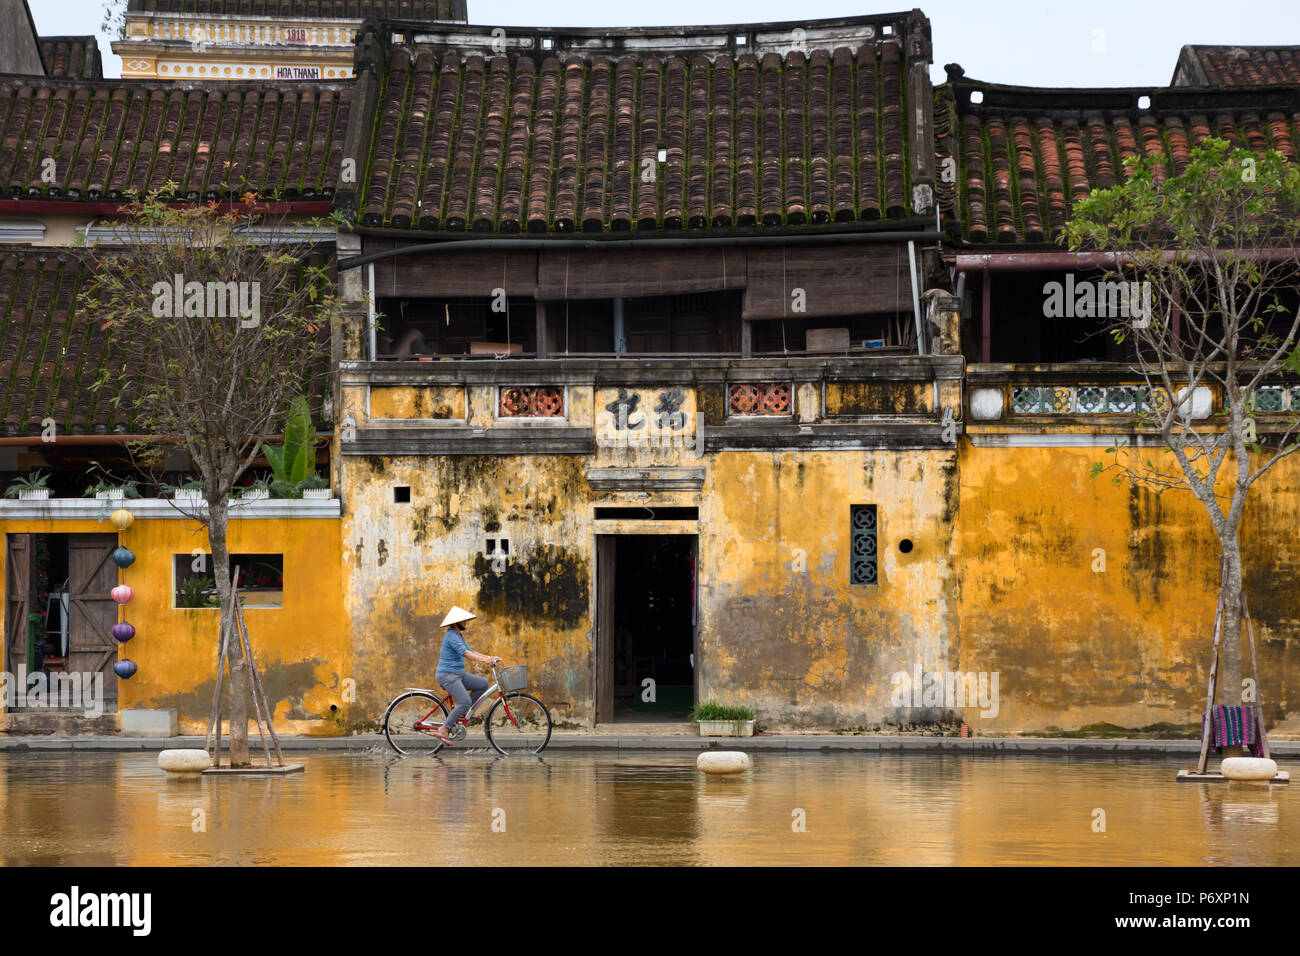 Streets of Hoi An , Vietnam - people and architecture Stock Photo